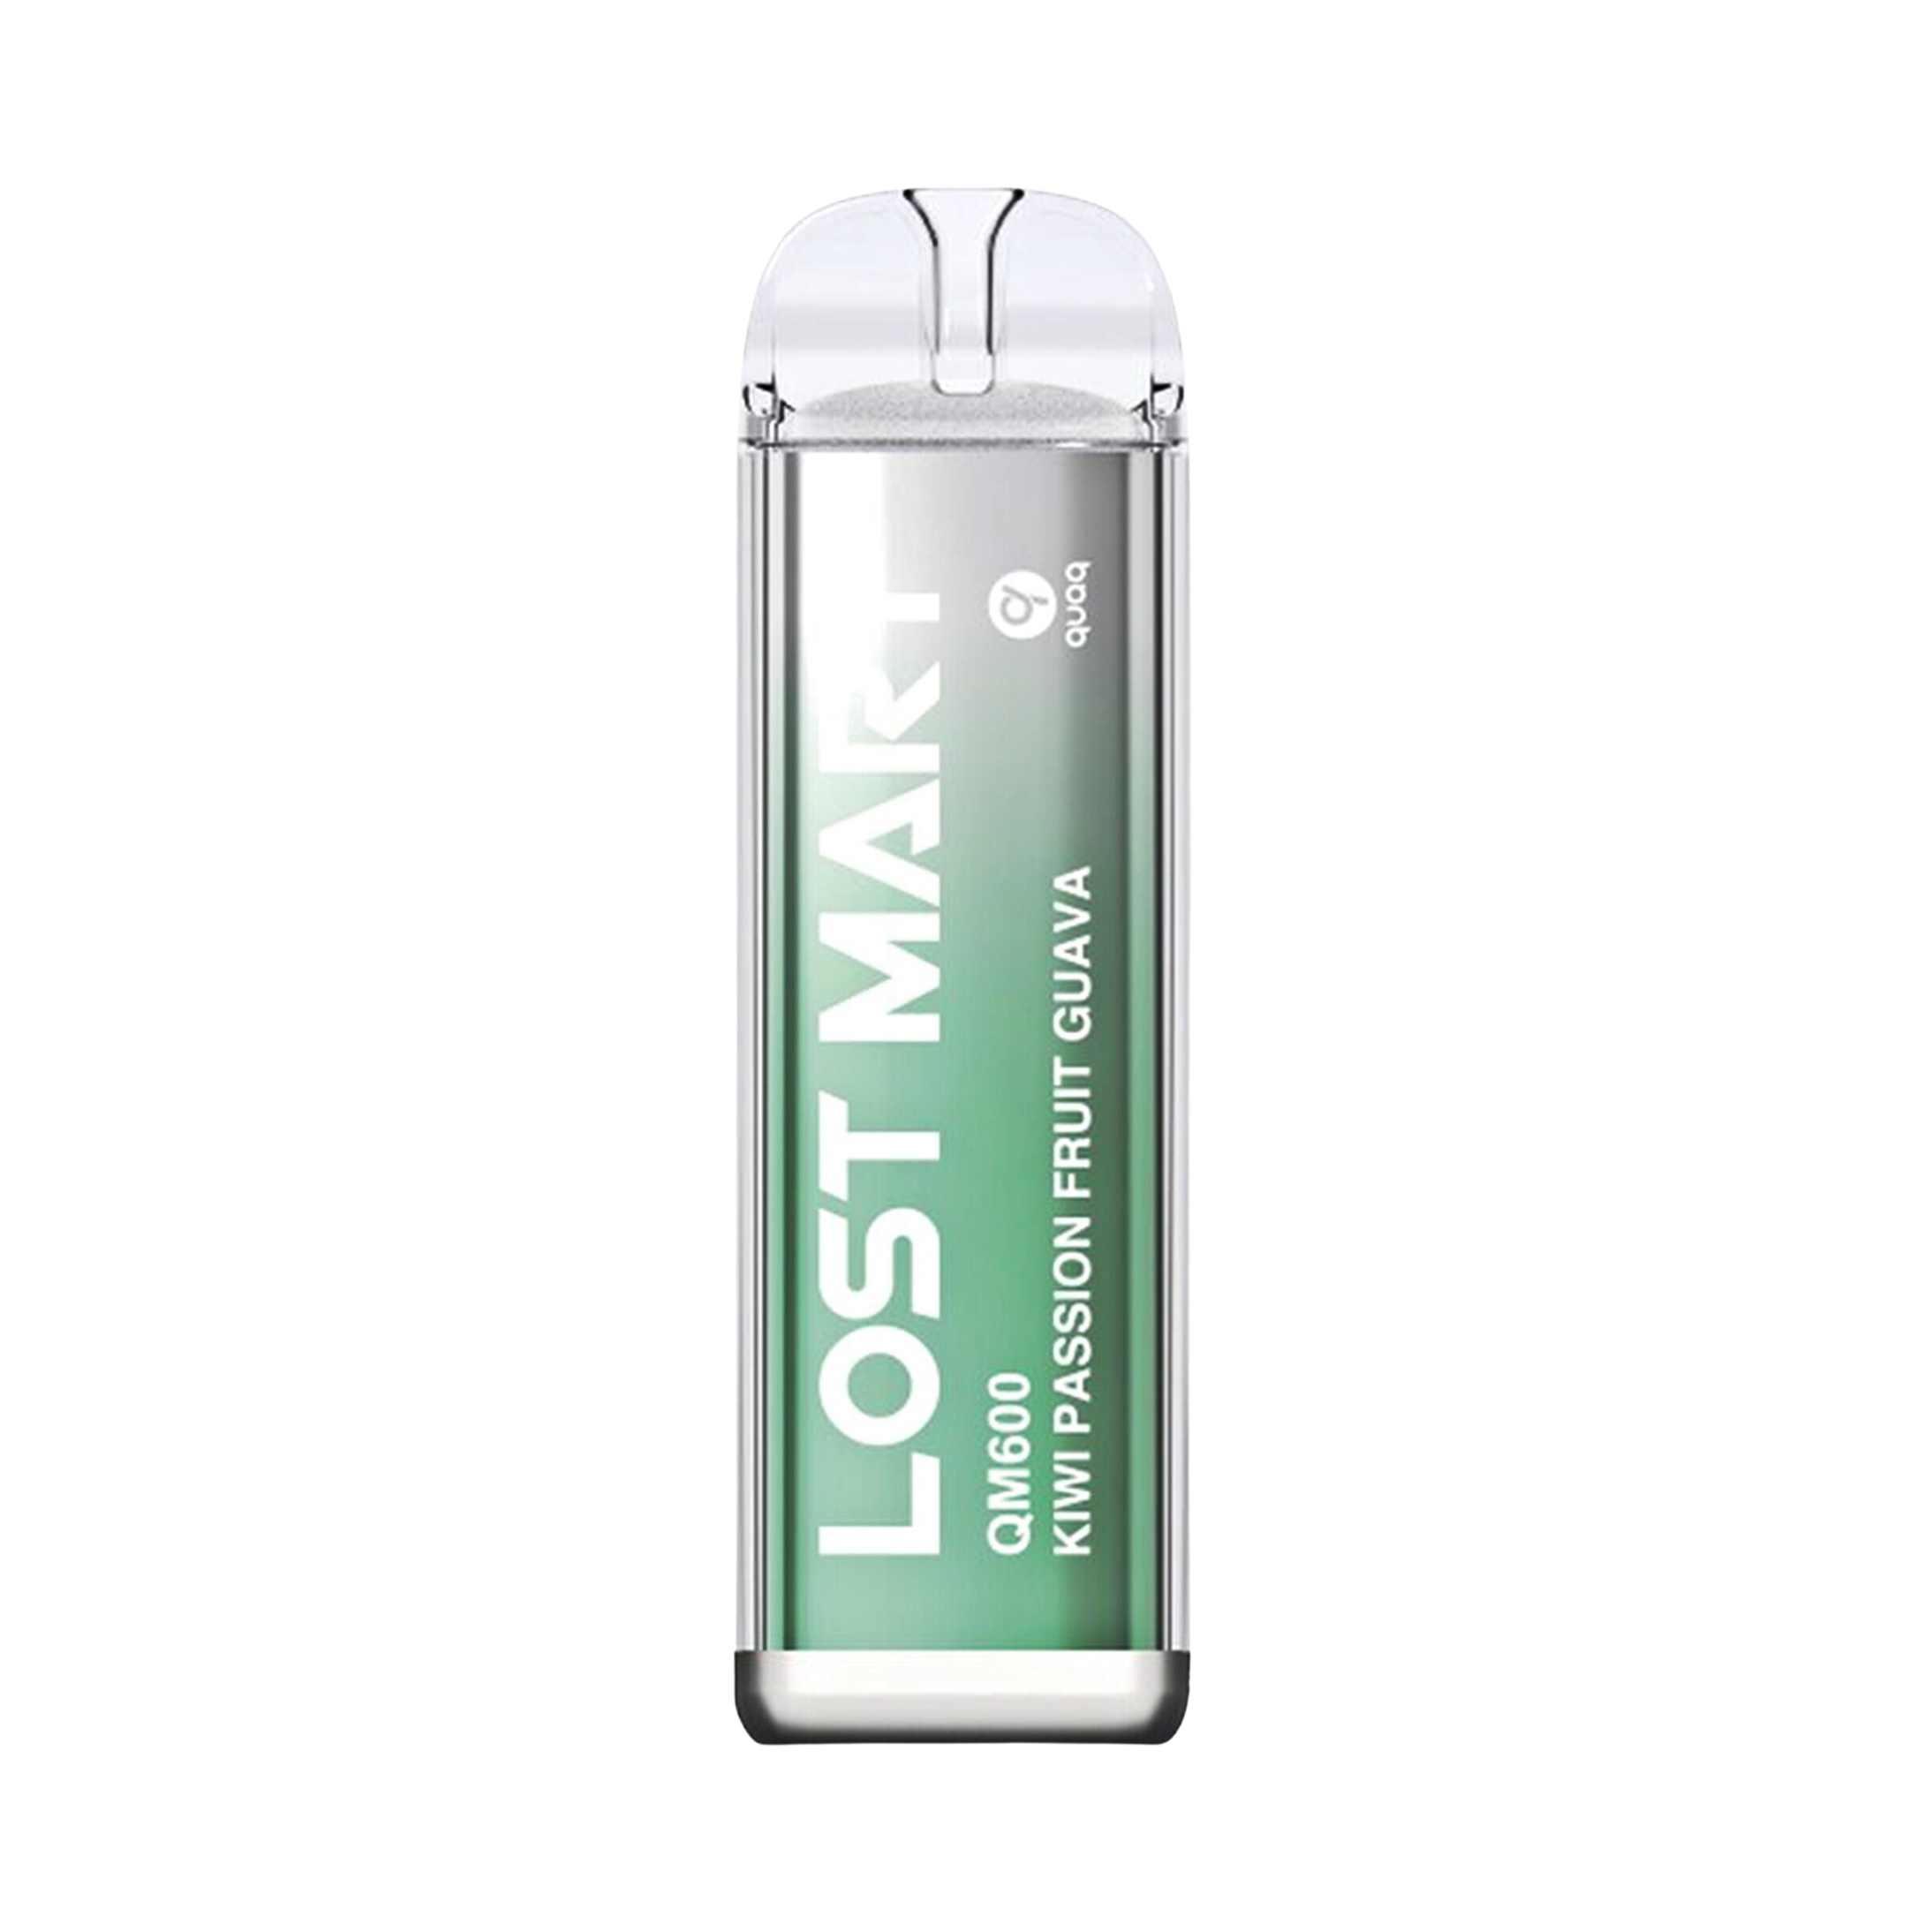 Lost Mary QM600 - Kiwi Passionfruit Guava - 20mg